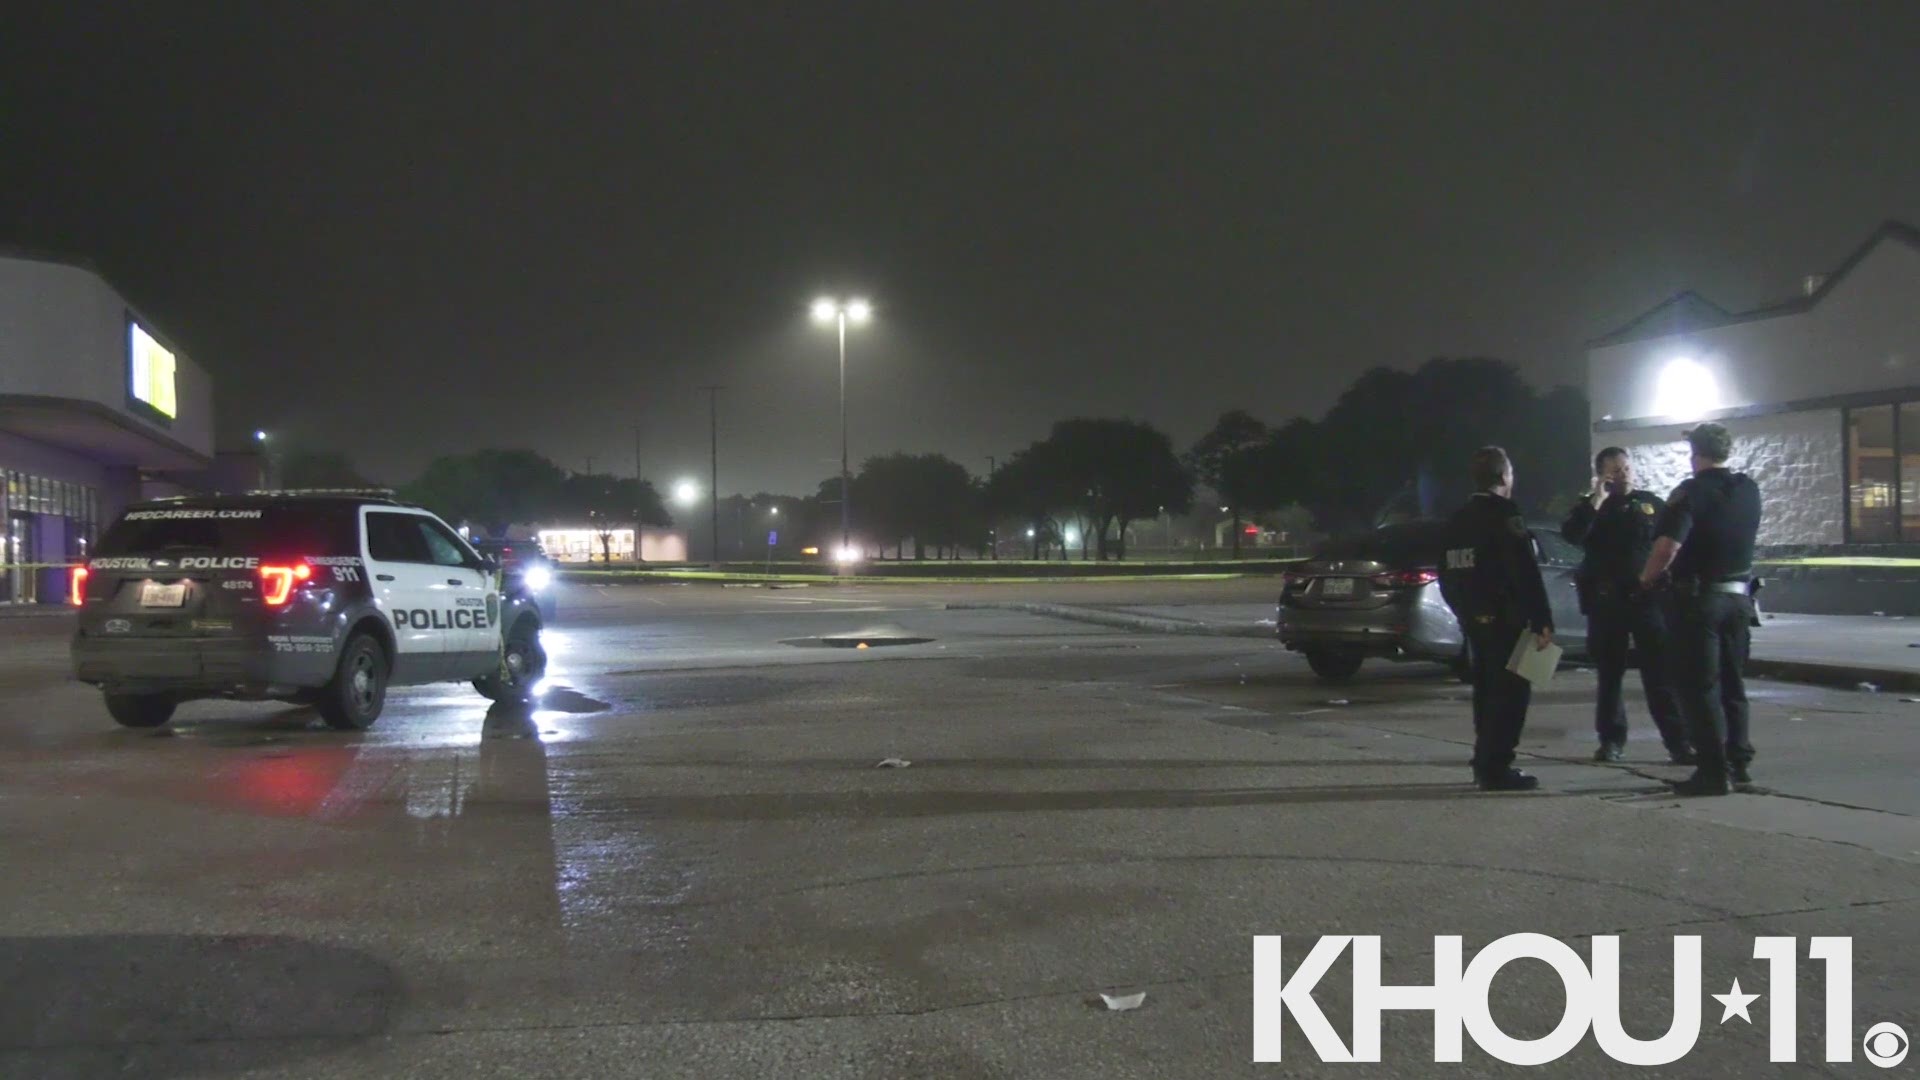 Houston police are looking for the suspect who shot a man then stole his car during an altercation in an empty parking lot near the Greenspoint area.